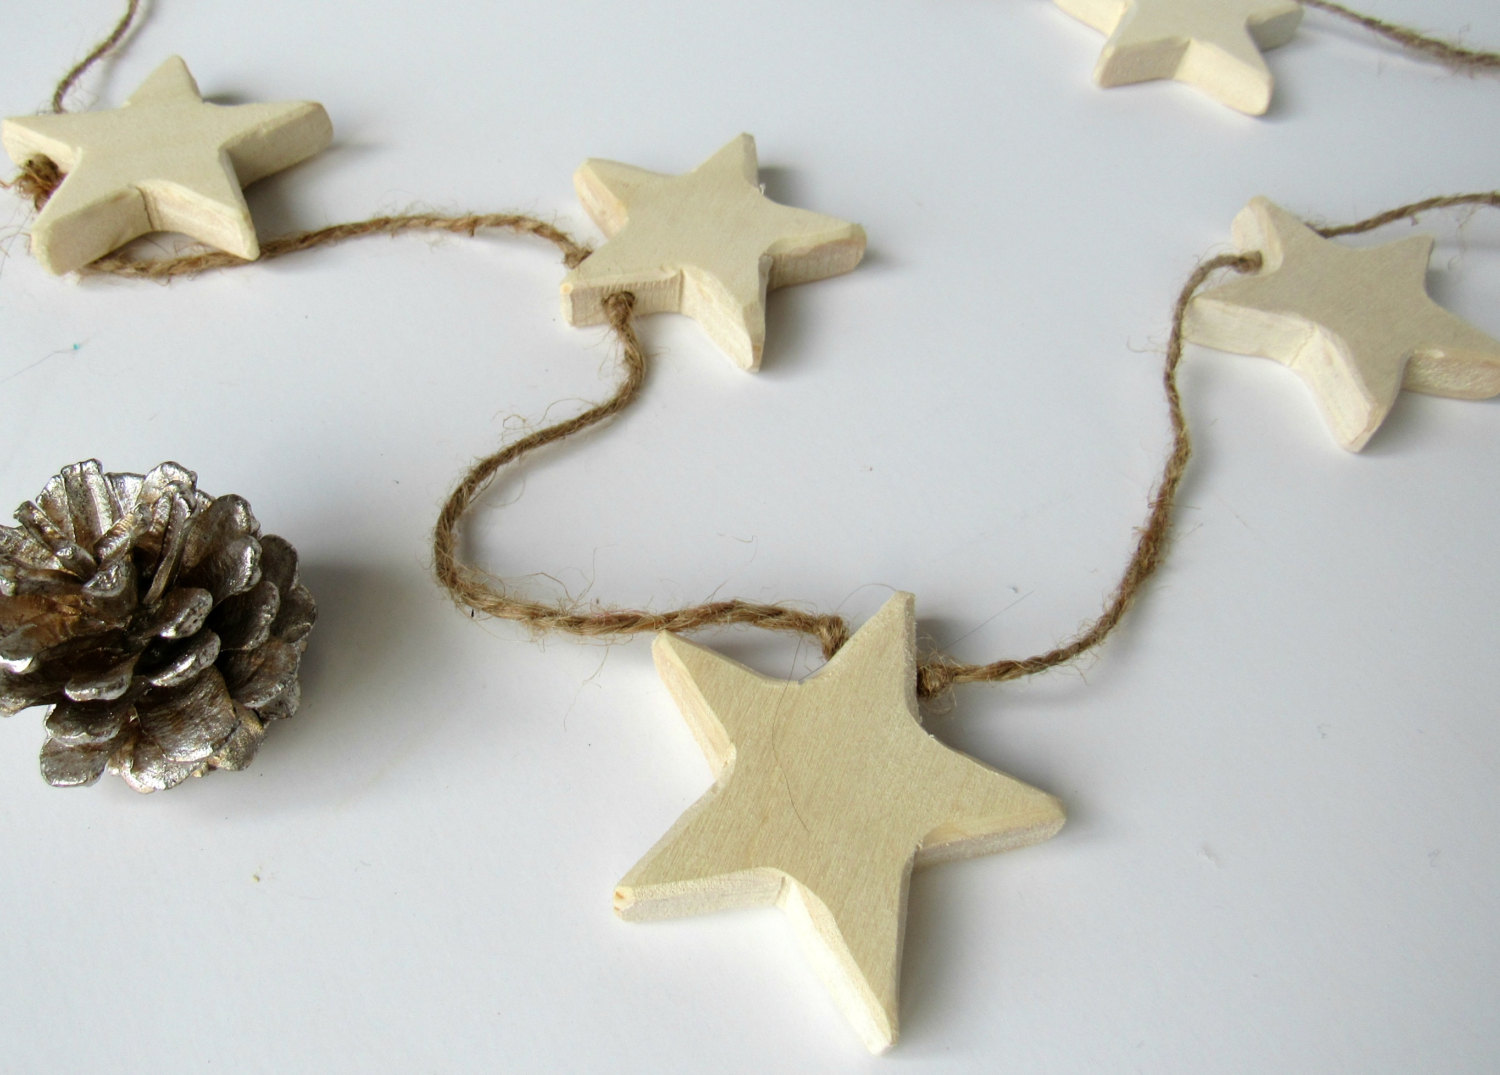 Michigan Gift Idea: Handmade Home Decor From Wood By Al // Featured - Wooden Star Twine Garland (via Wading in Big Shoes)